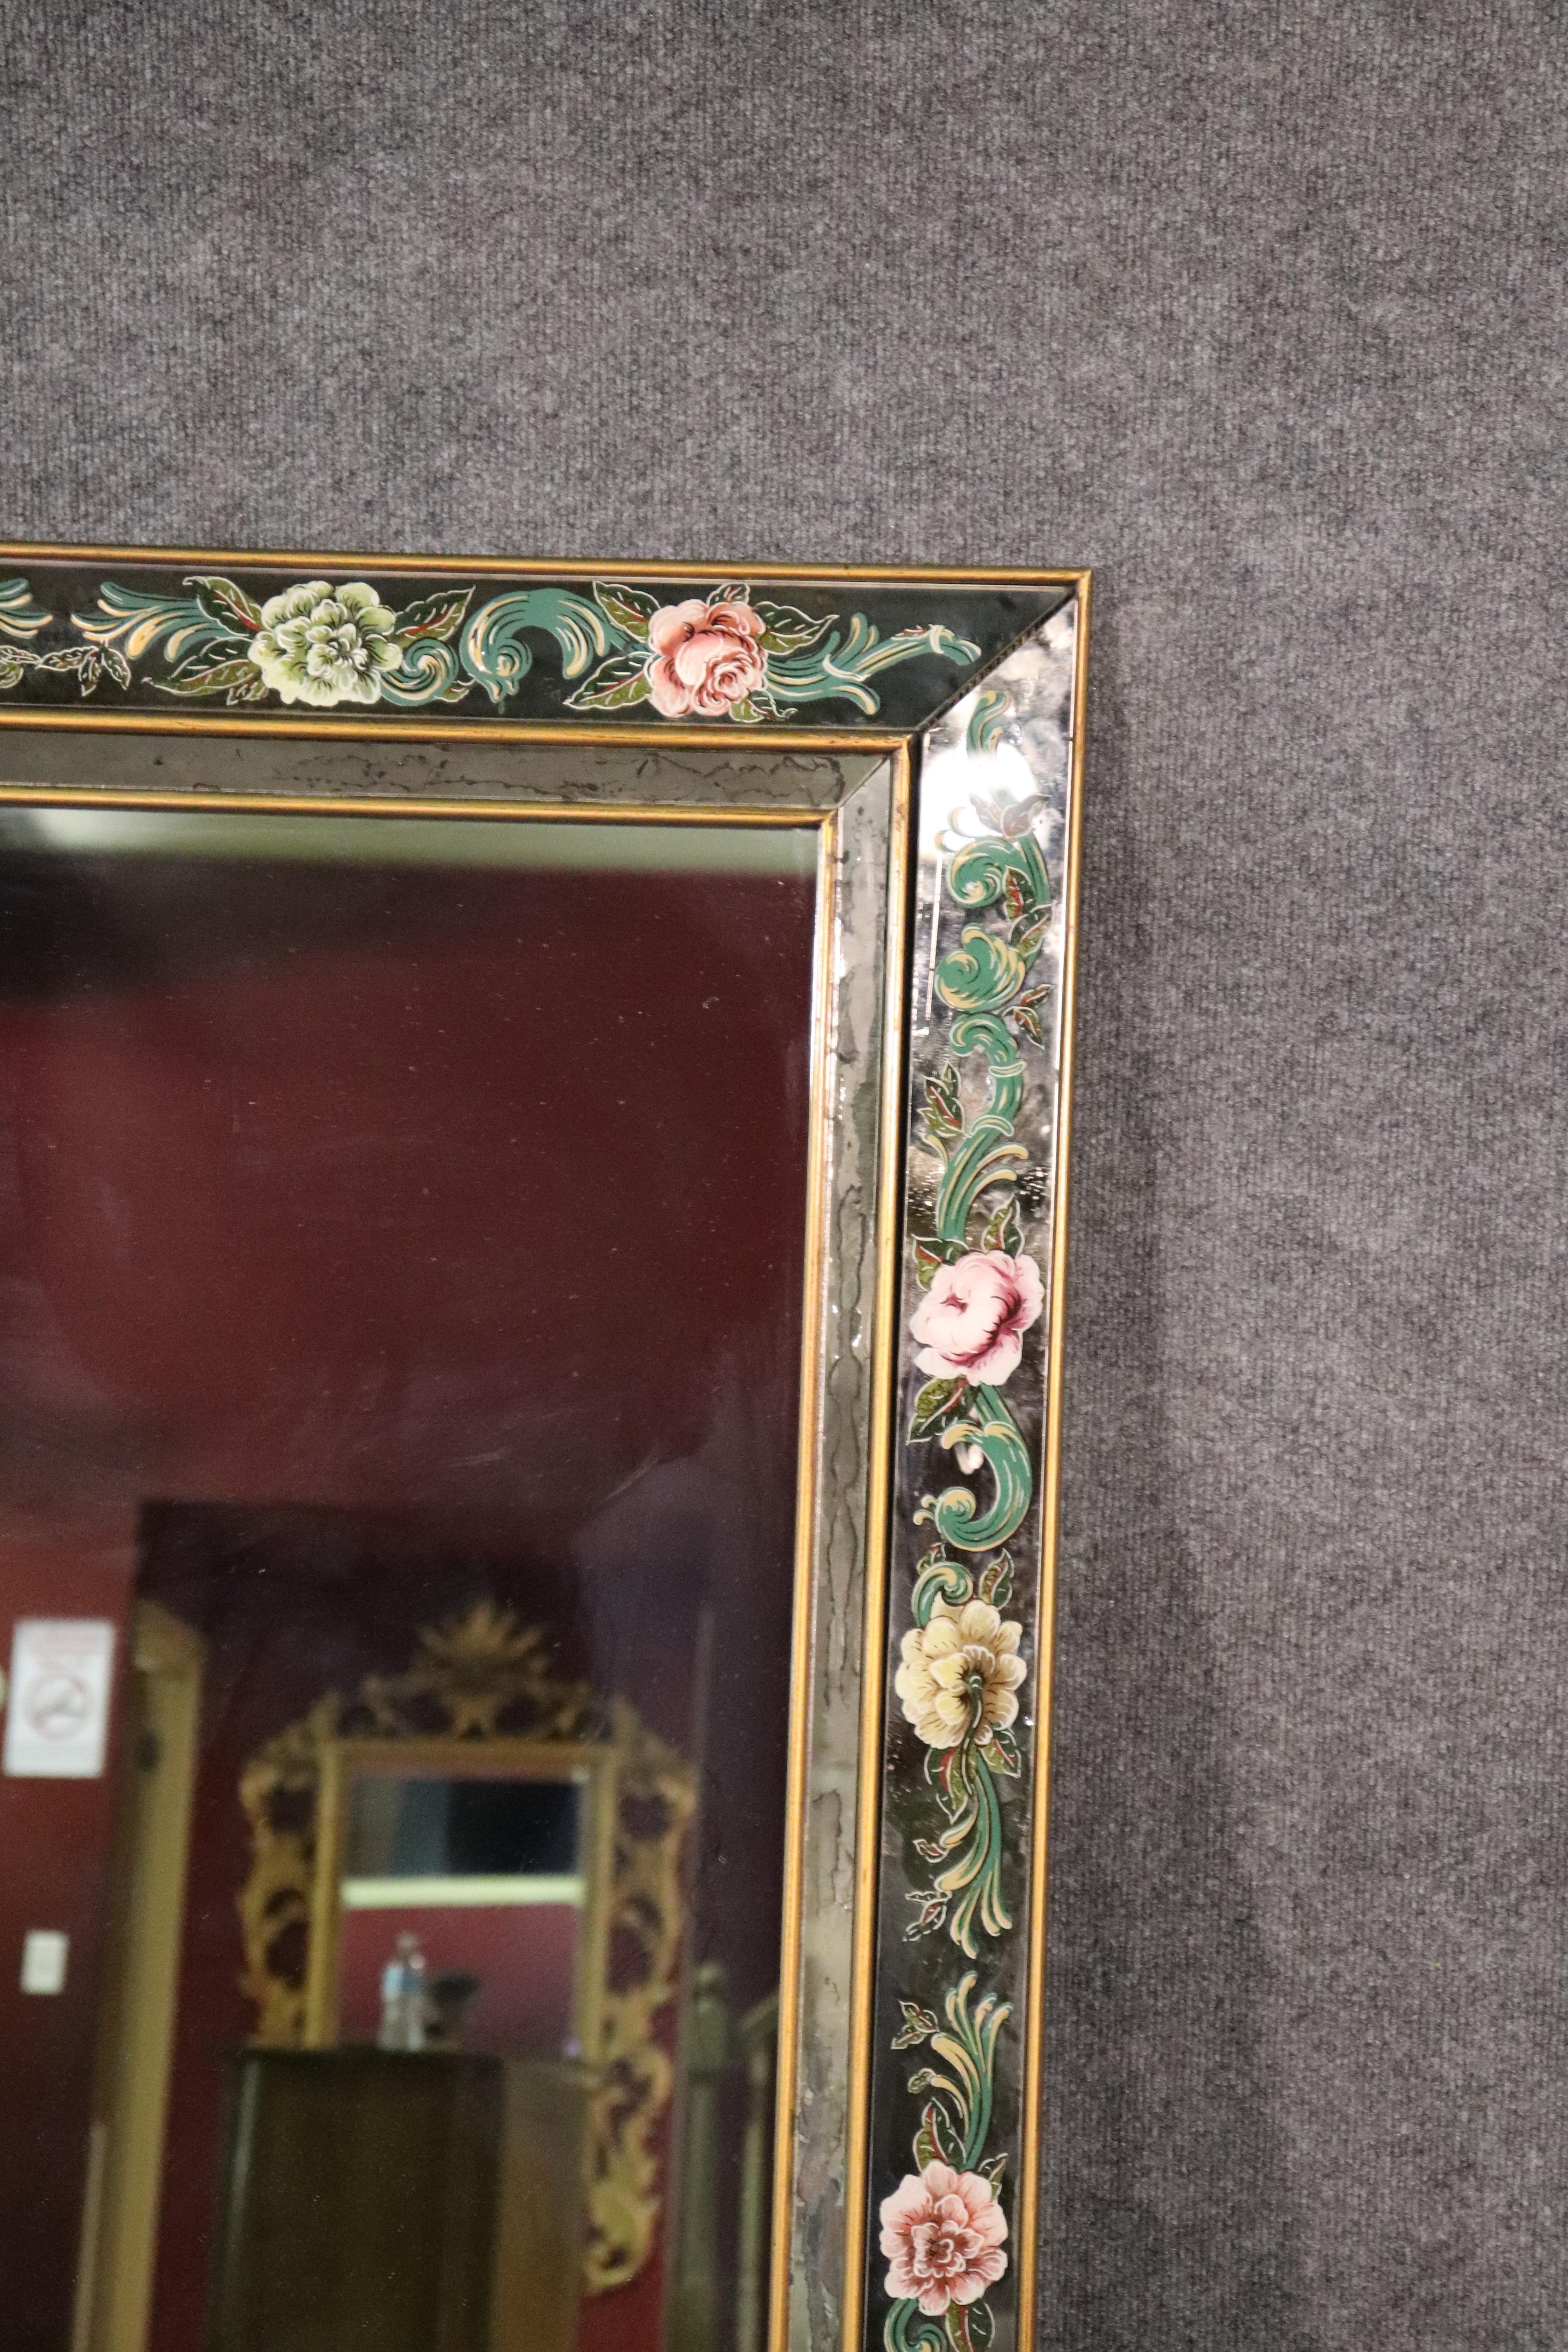 This is a great mirror that dates to the 1950s era and has a cushion style to it, as the edges of the mirror are dimensional and not flat. The glass as well as the paint decorated églomisé flowers are in good condition. The mirror is perfect for